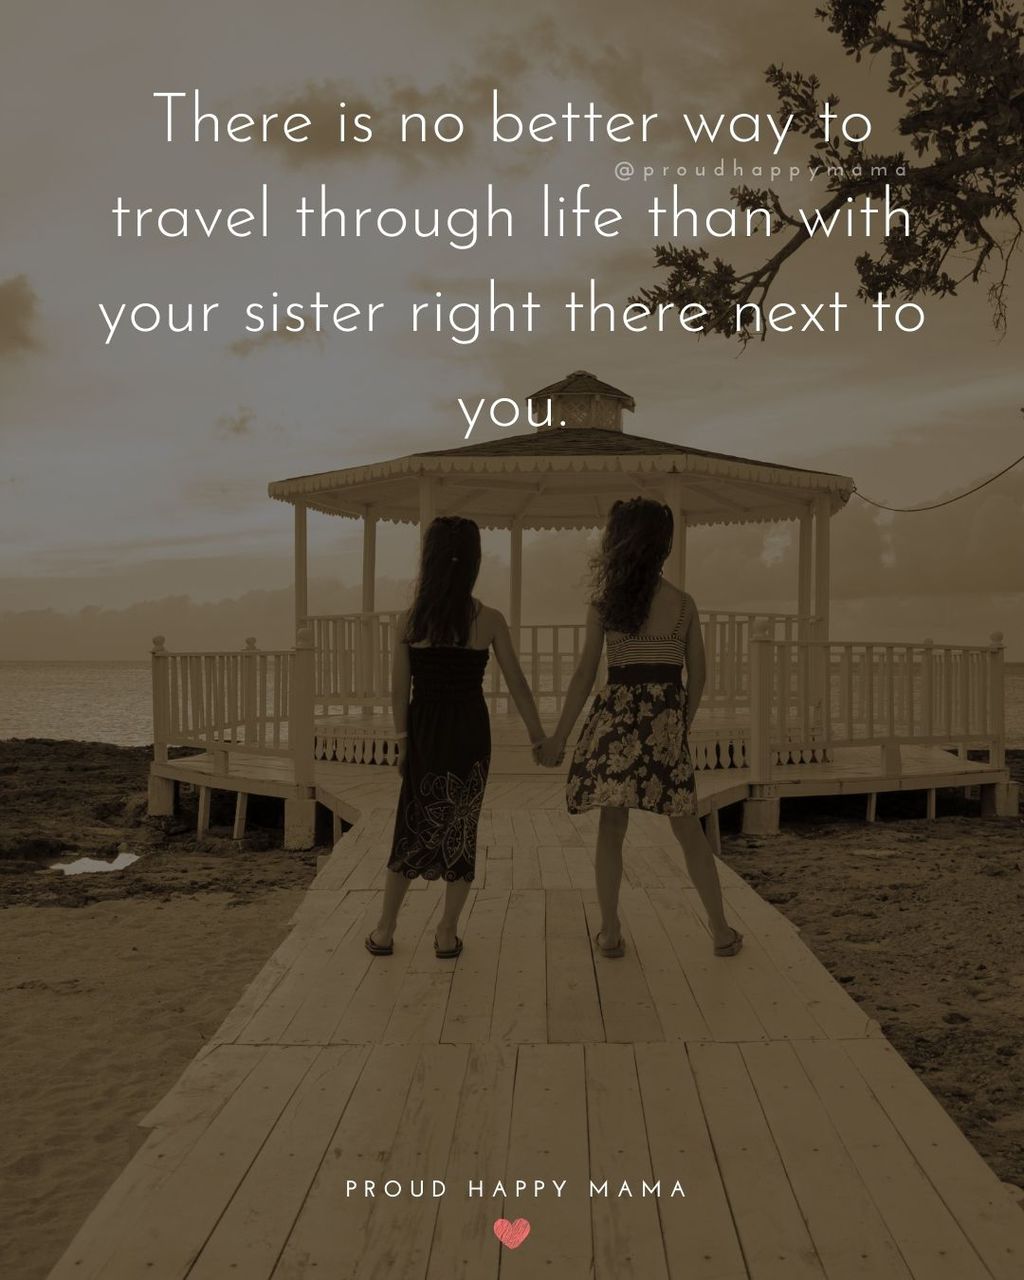 Sister Quotes - There is no better way to travel through life than with your sister right there next to you.